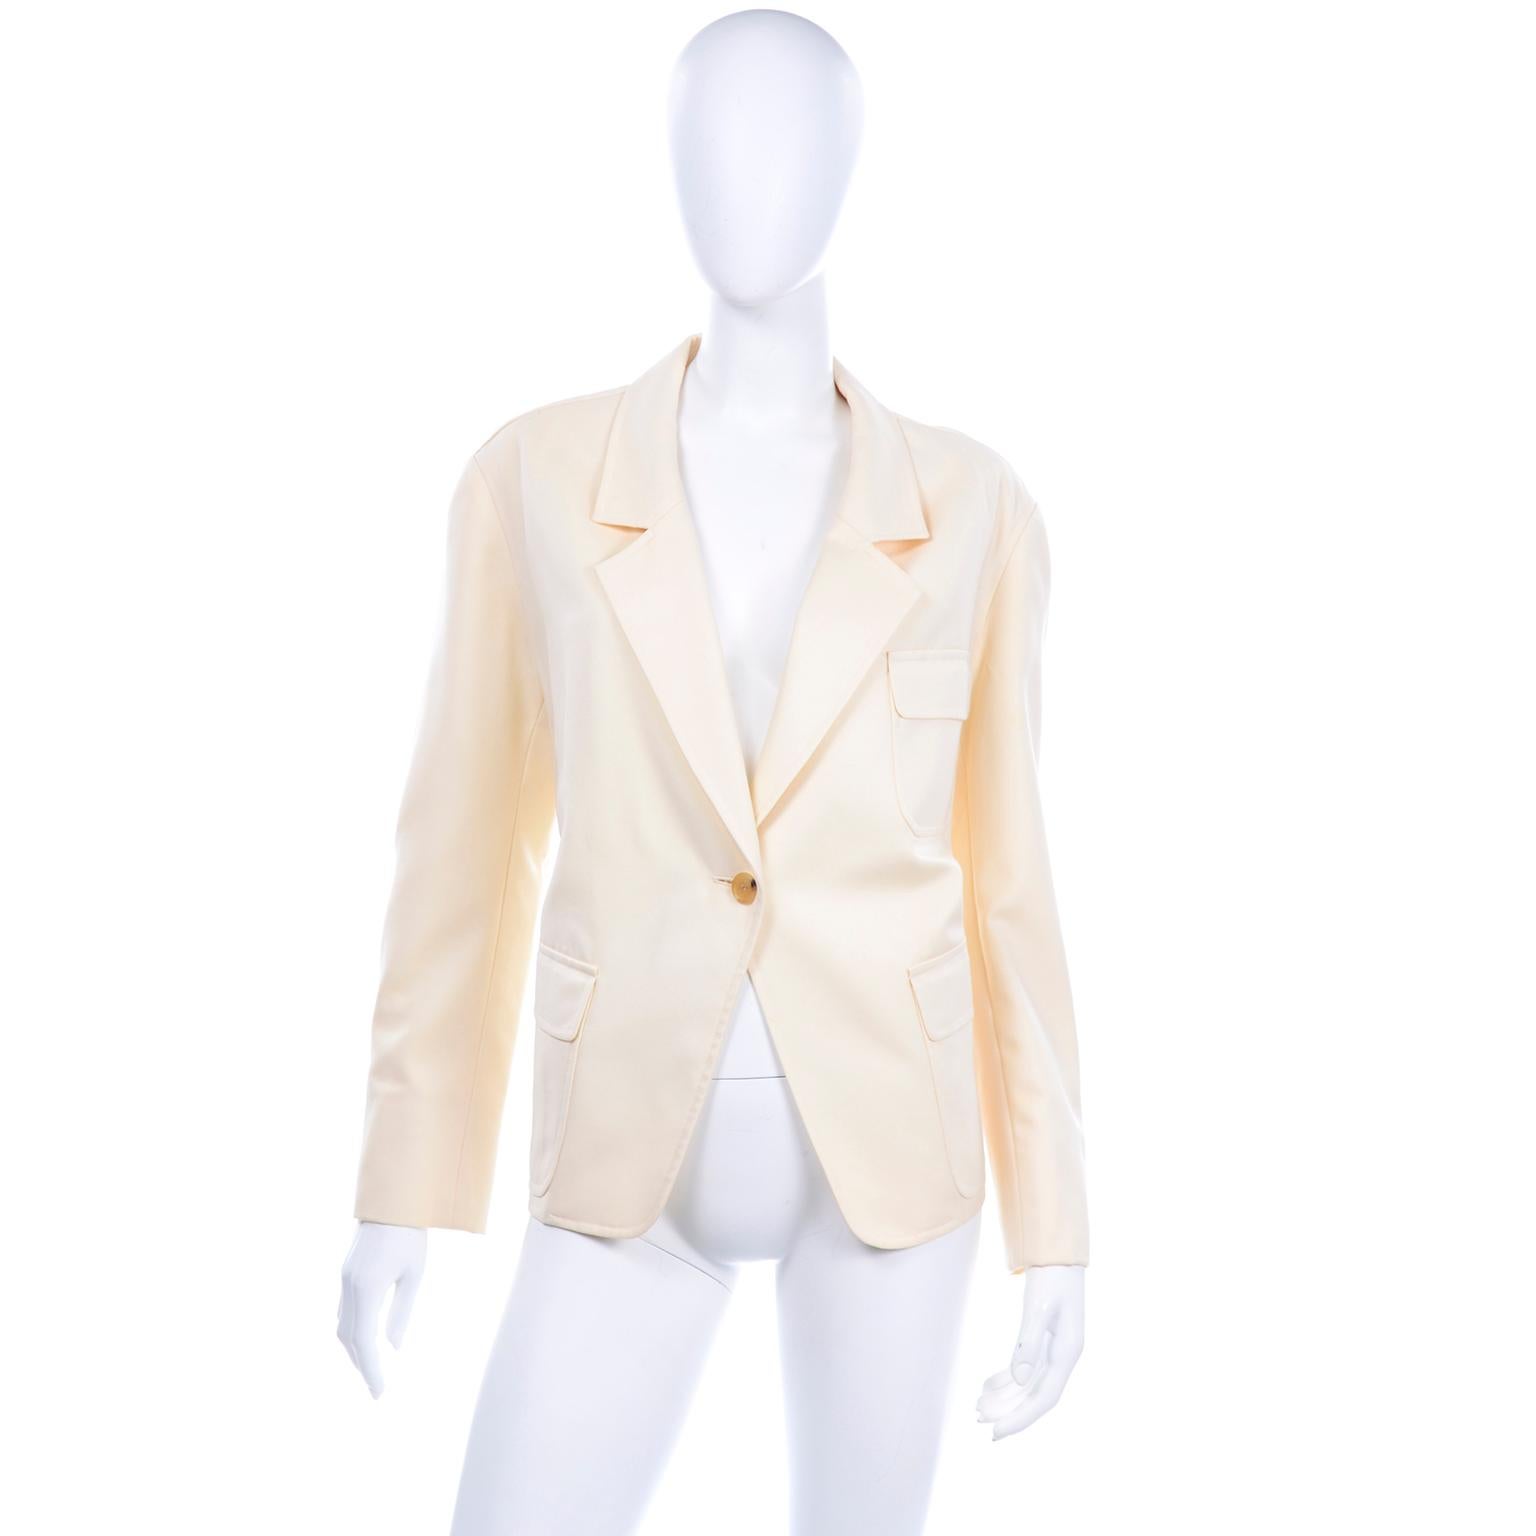 Vintage Isaac Mizrahi 100% Pure New Wool cream blazer. This boxy jacket closes with one light tortoise button and has flap front pockets, a breast pocket, and shoulder pads. The blazer is fully lined with small buttons on the sleeves.Labeled size